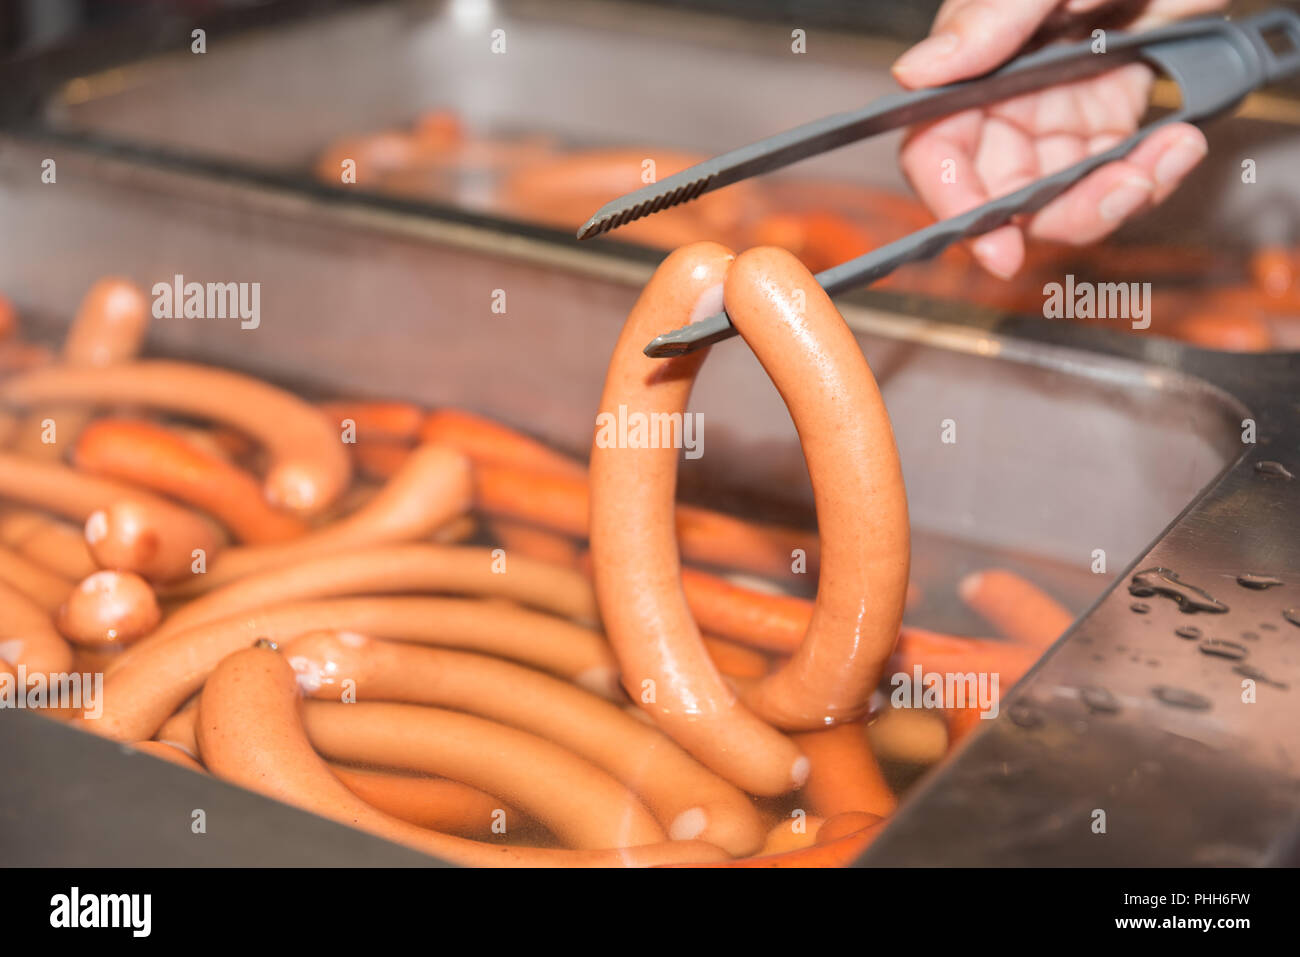 Viennese sausages ready to be cooked are taken with forceps Stock Photo